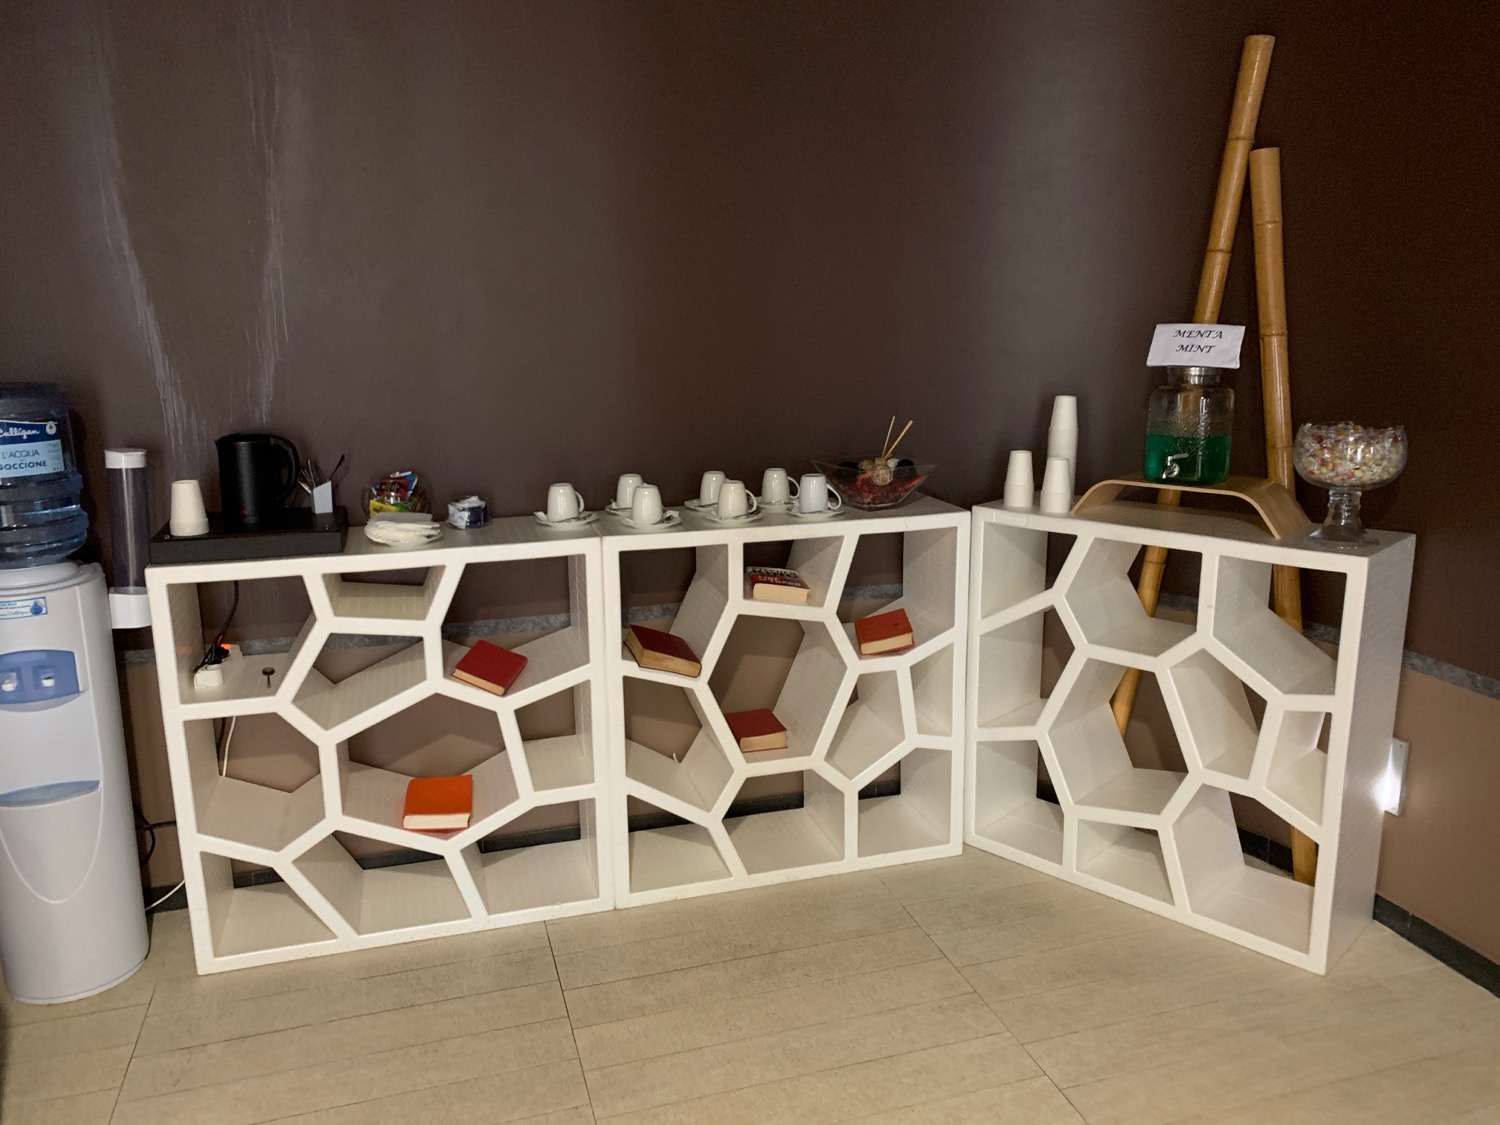 a white shelves with a pattern on them